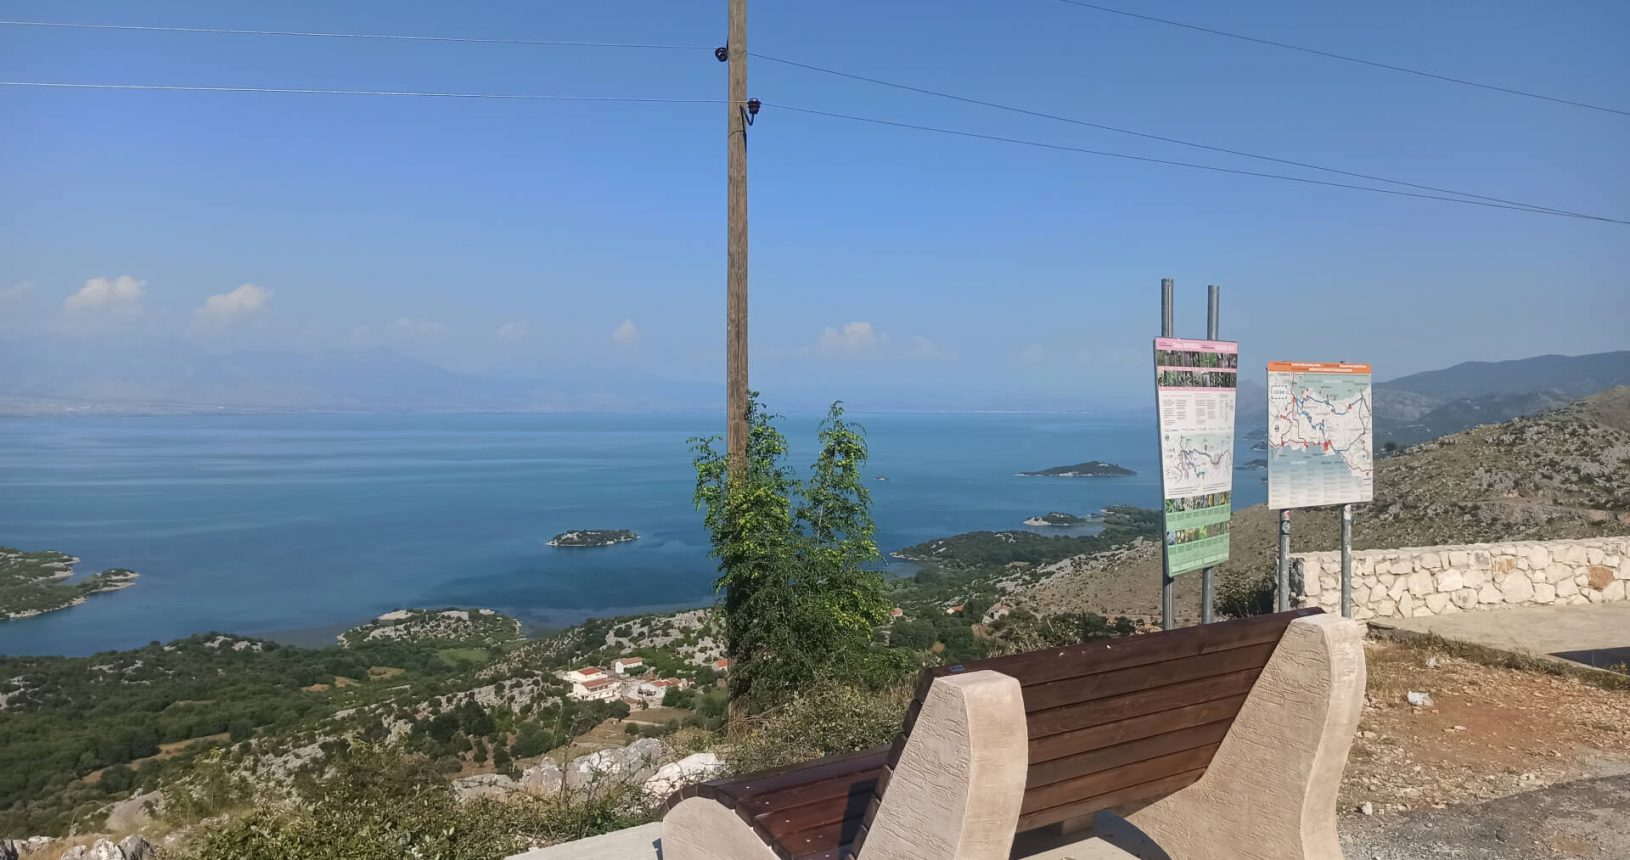 Fantastic view from the bench at Viewpoint Donji Murici